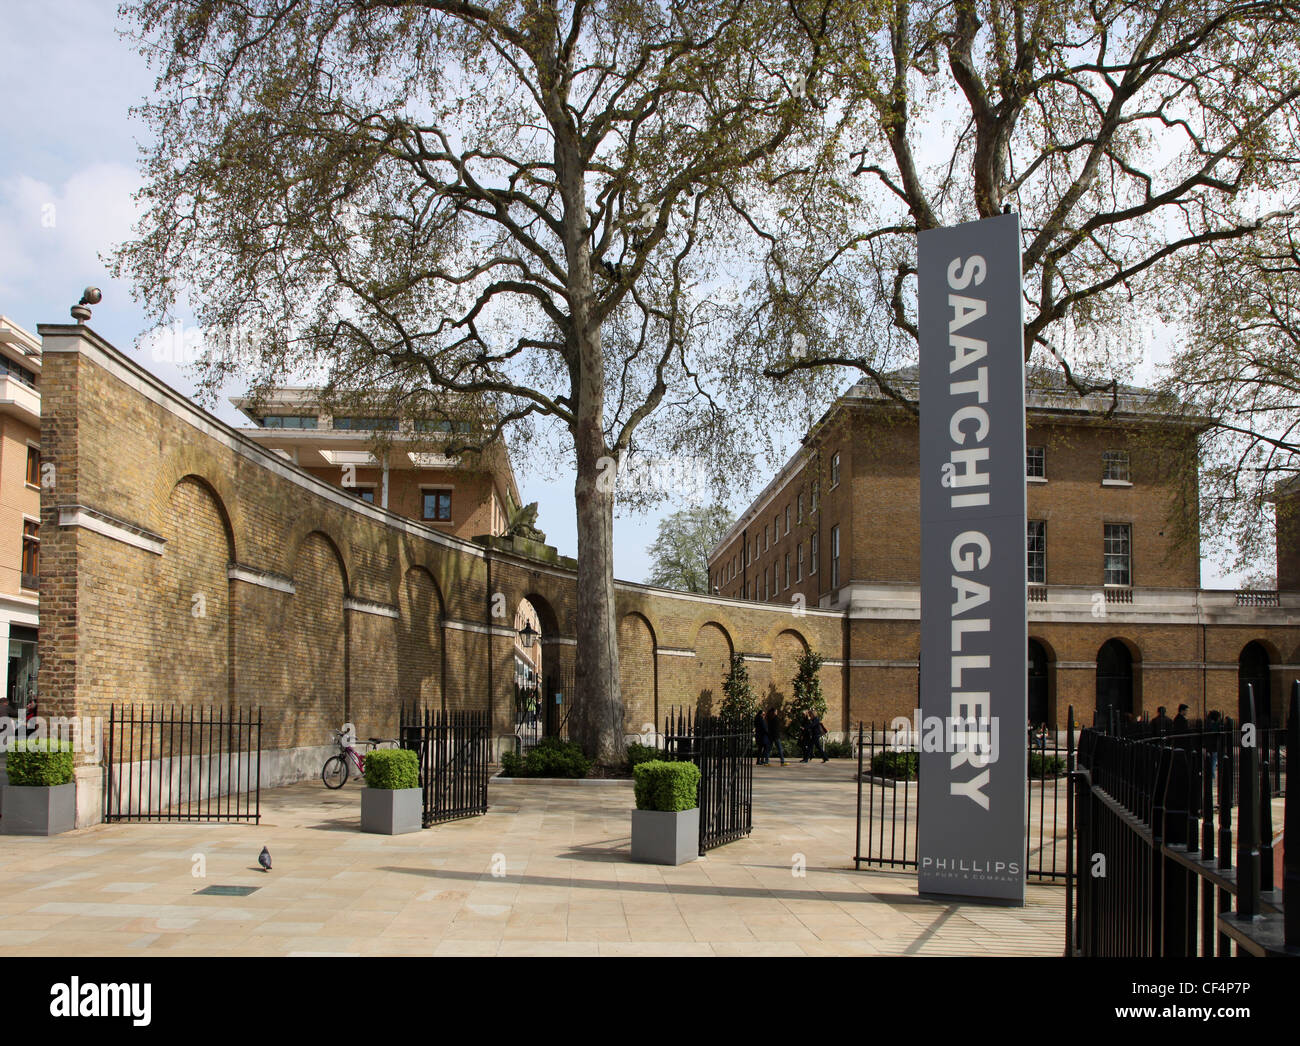 The Saatchi Gallery at the Duke of York's HQ in Sloane Square opened in